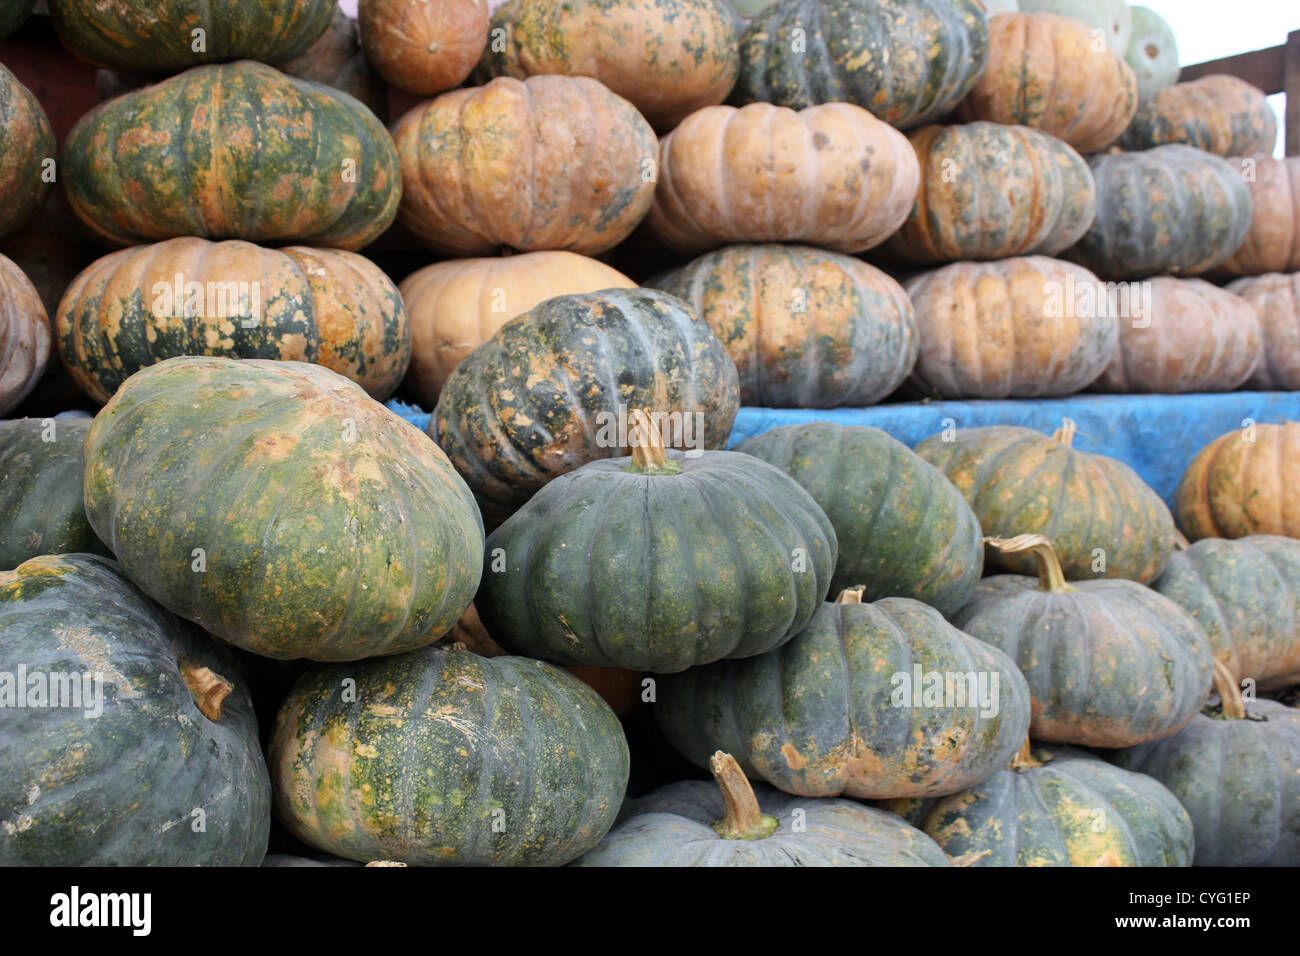 Pumpkins displayed for sale in vegetable shop in India Stock Photo